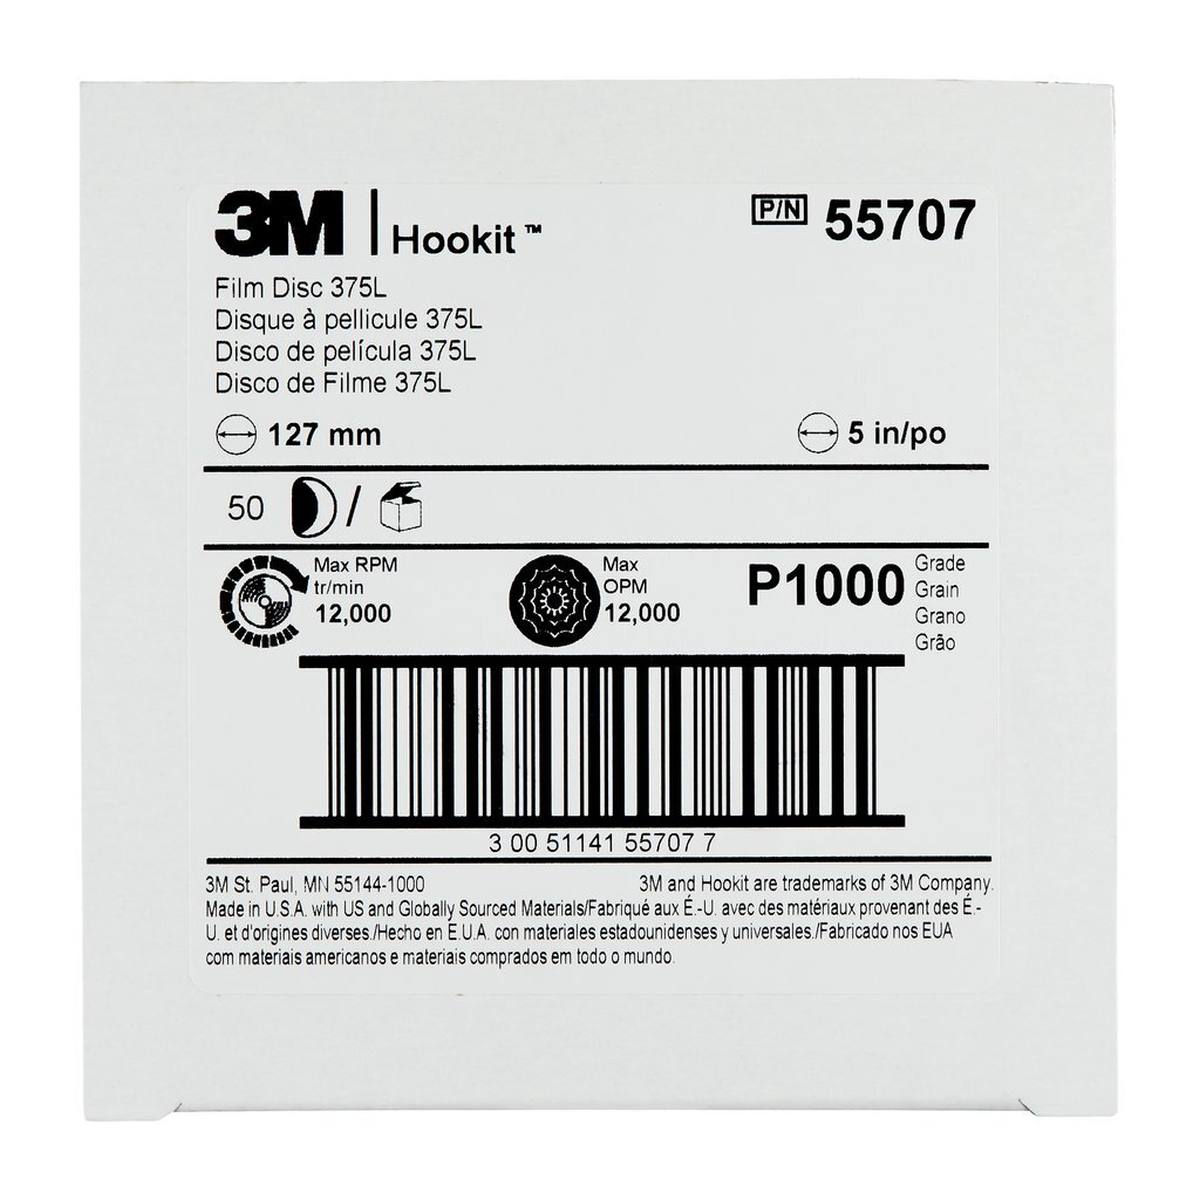 3M Hookit Velcro-backed disc 375L, 150 mm, P1500, perforated 15 times